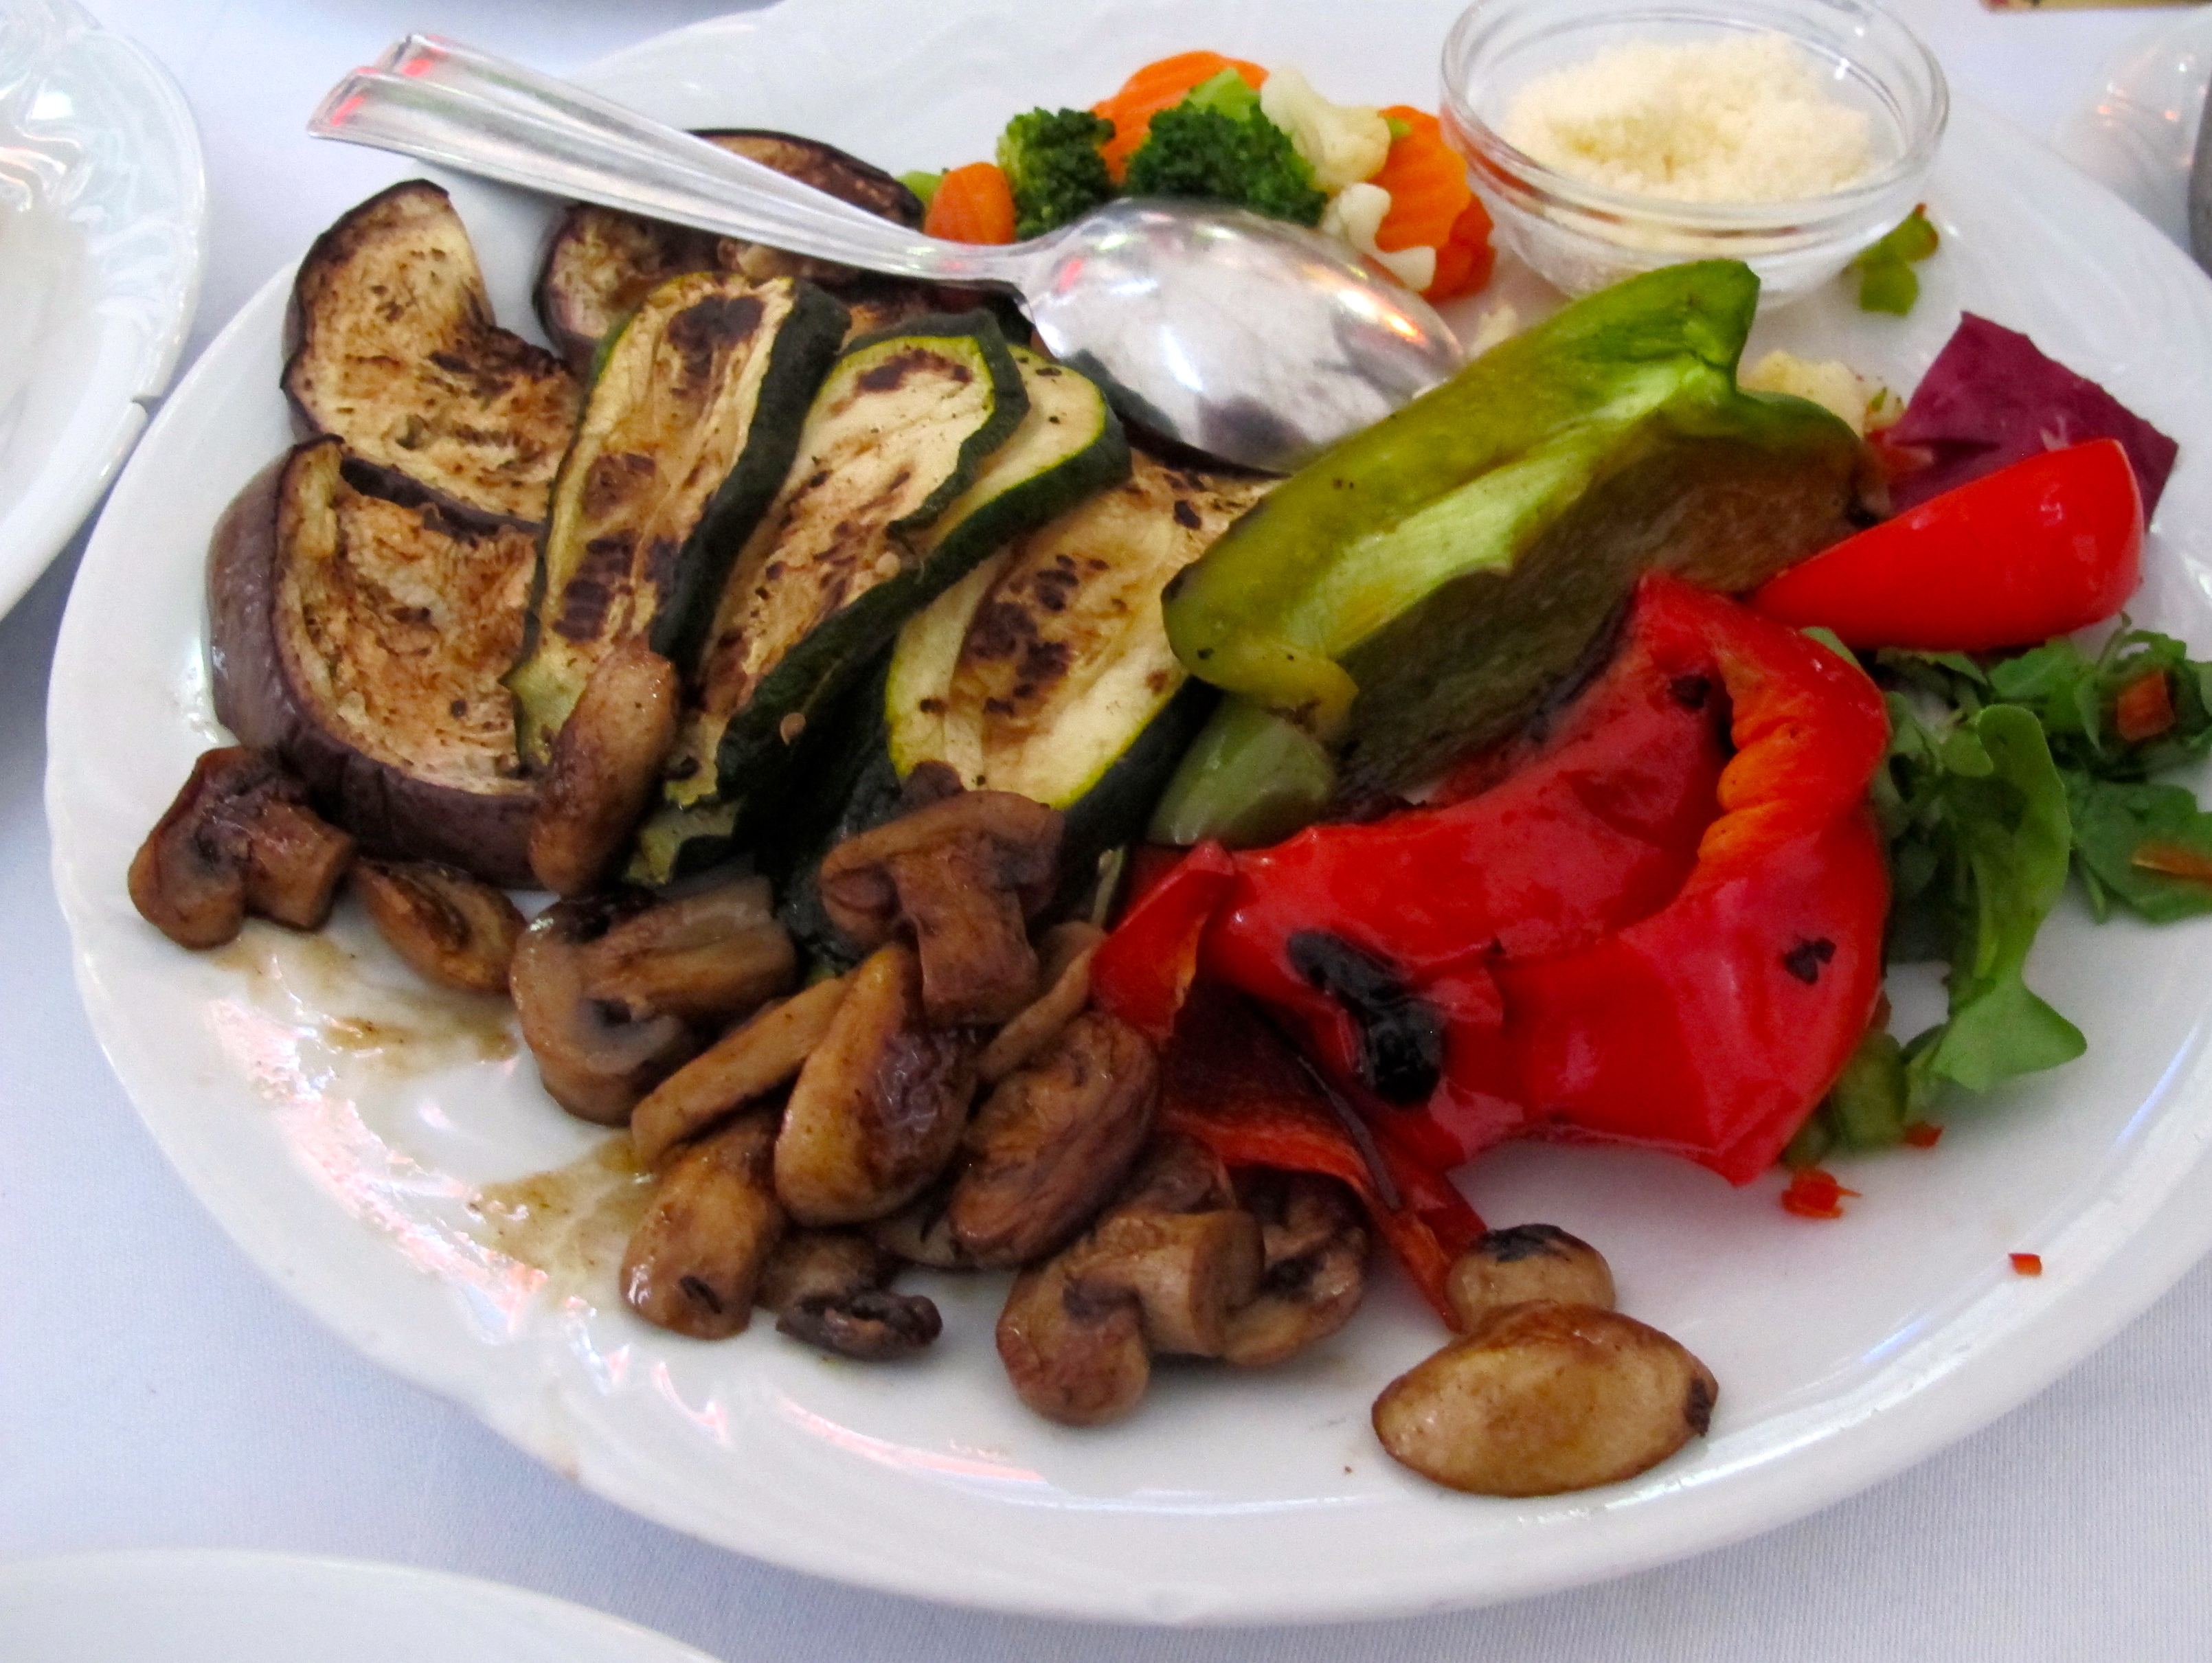 Vegetables grilled in truffle oil are unbelievably luscious at Gostilna Sokol. Photos by Marla Norman.